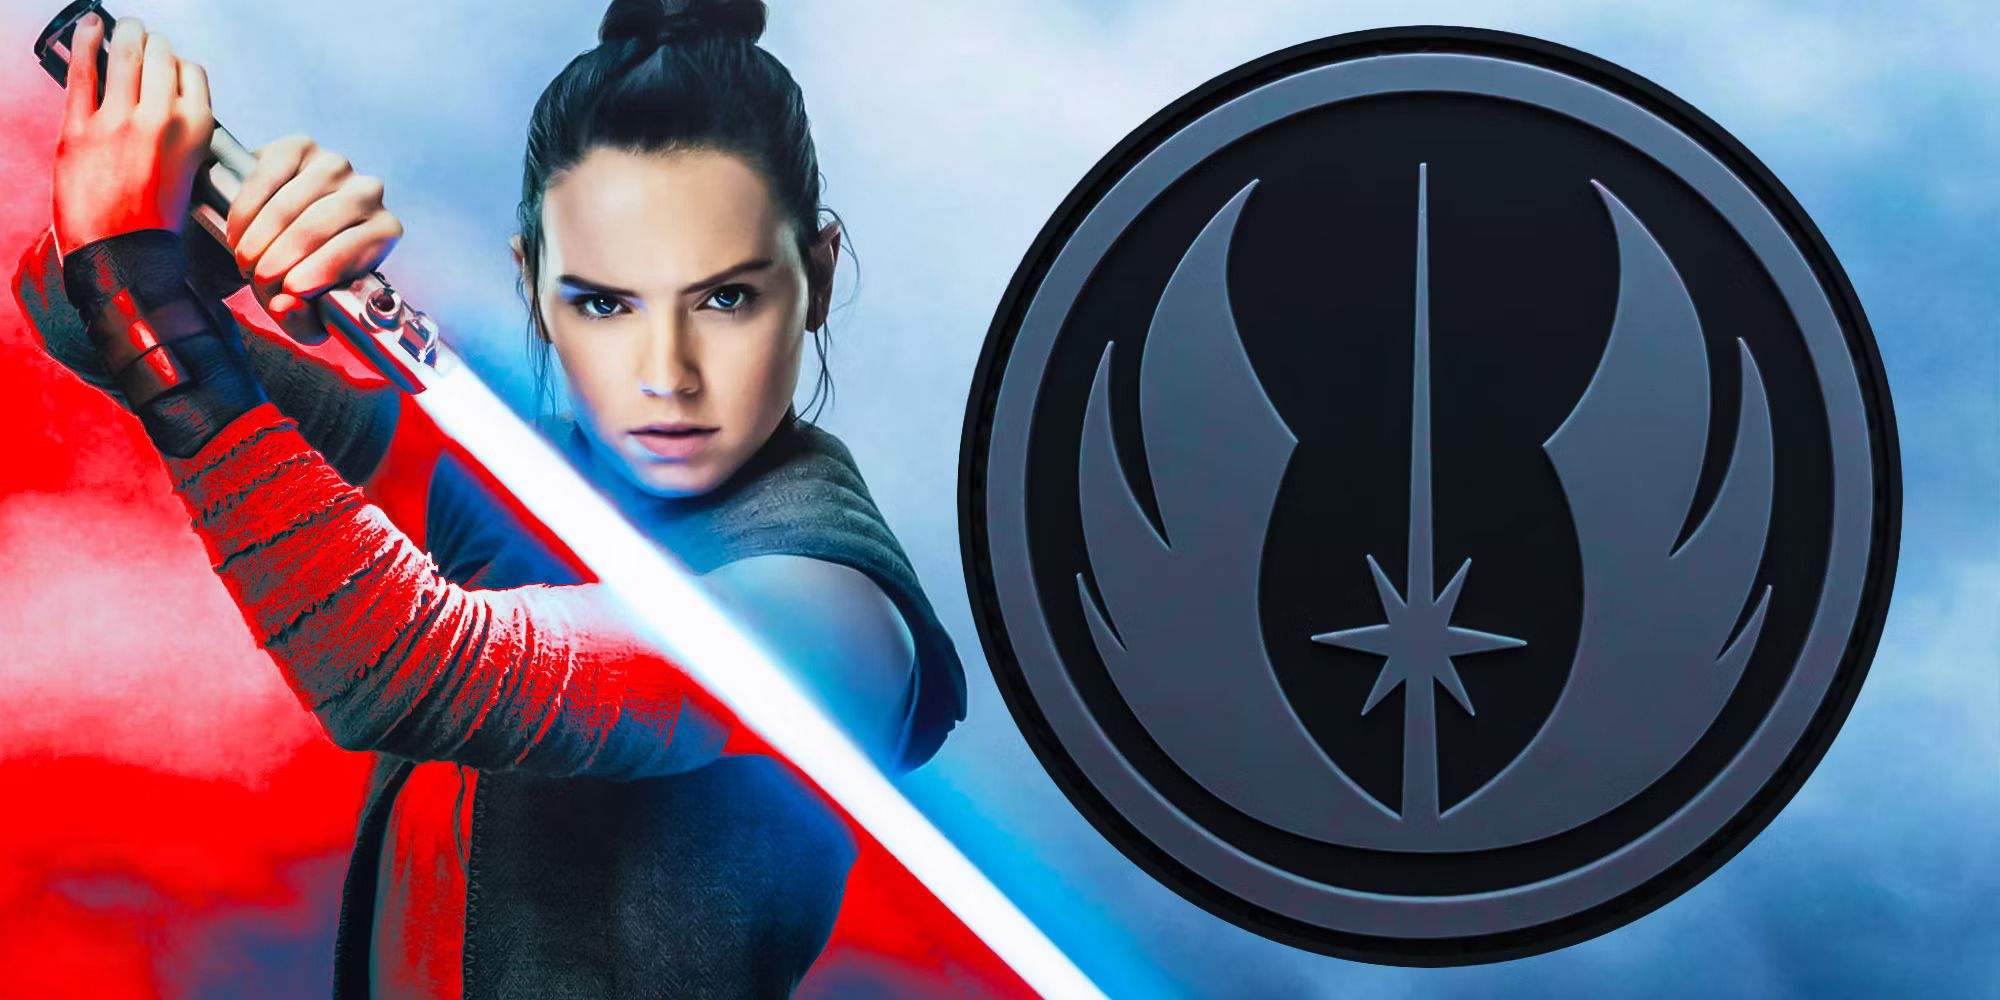 Rey with her blue lightsaber, with the boottom left corner shaded in red while the right side of the image has a grey Jedi Order logo.